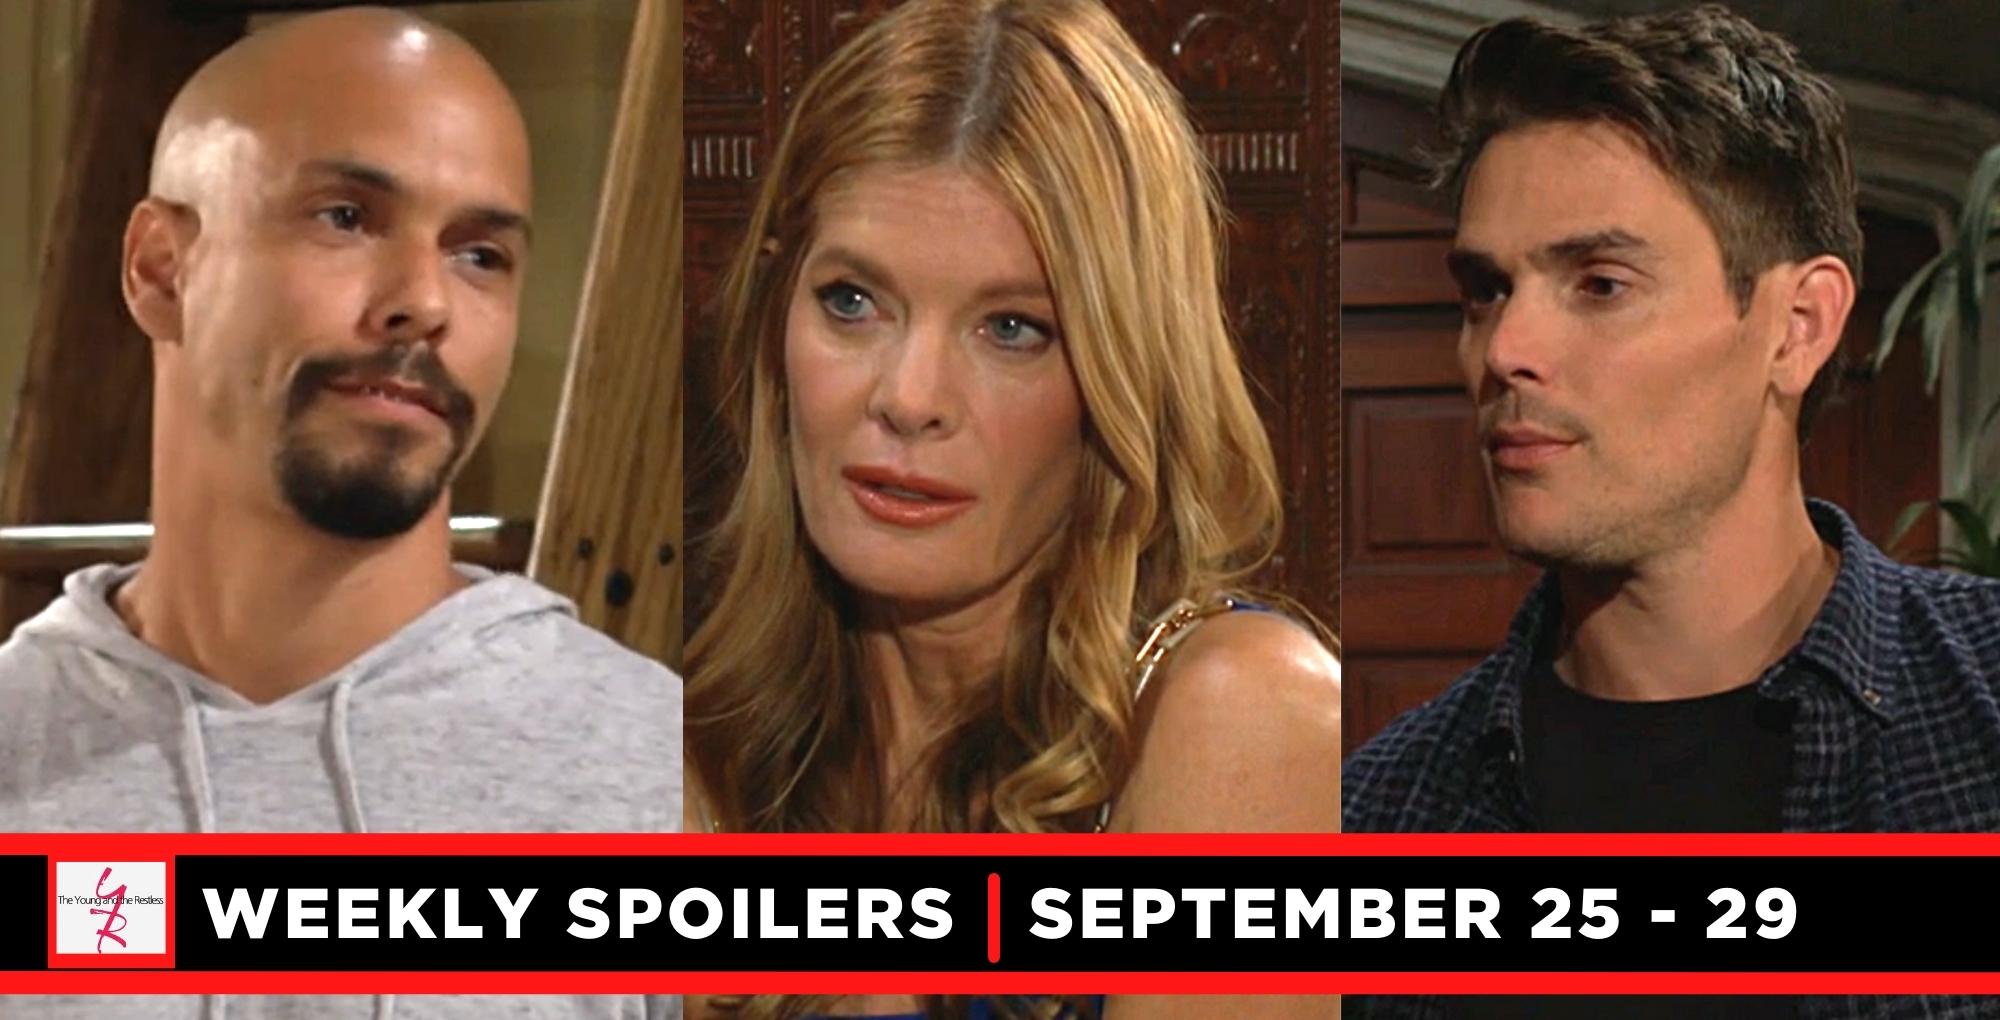 the young and the restless spoilers for september 25 – september 29, 2023, three images, devon, phyllis, and adam.